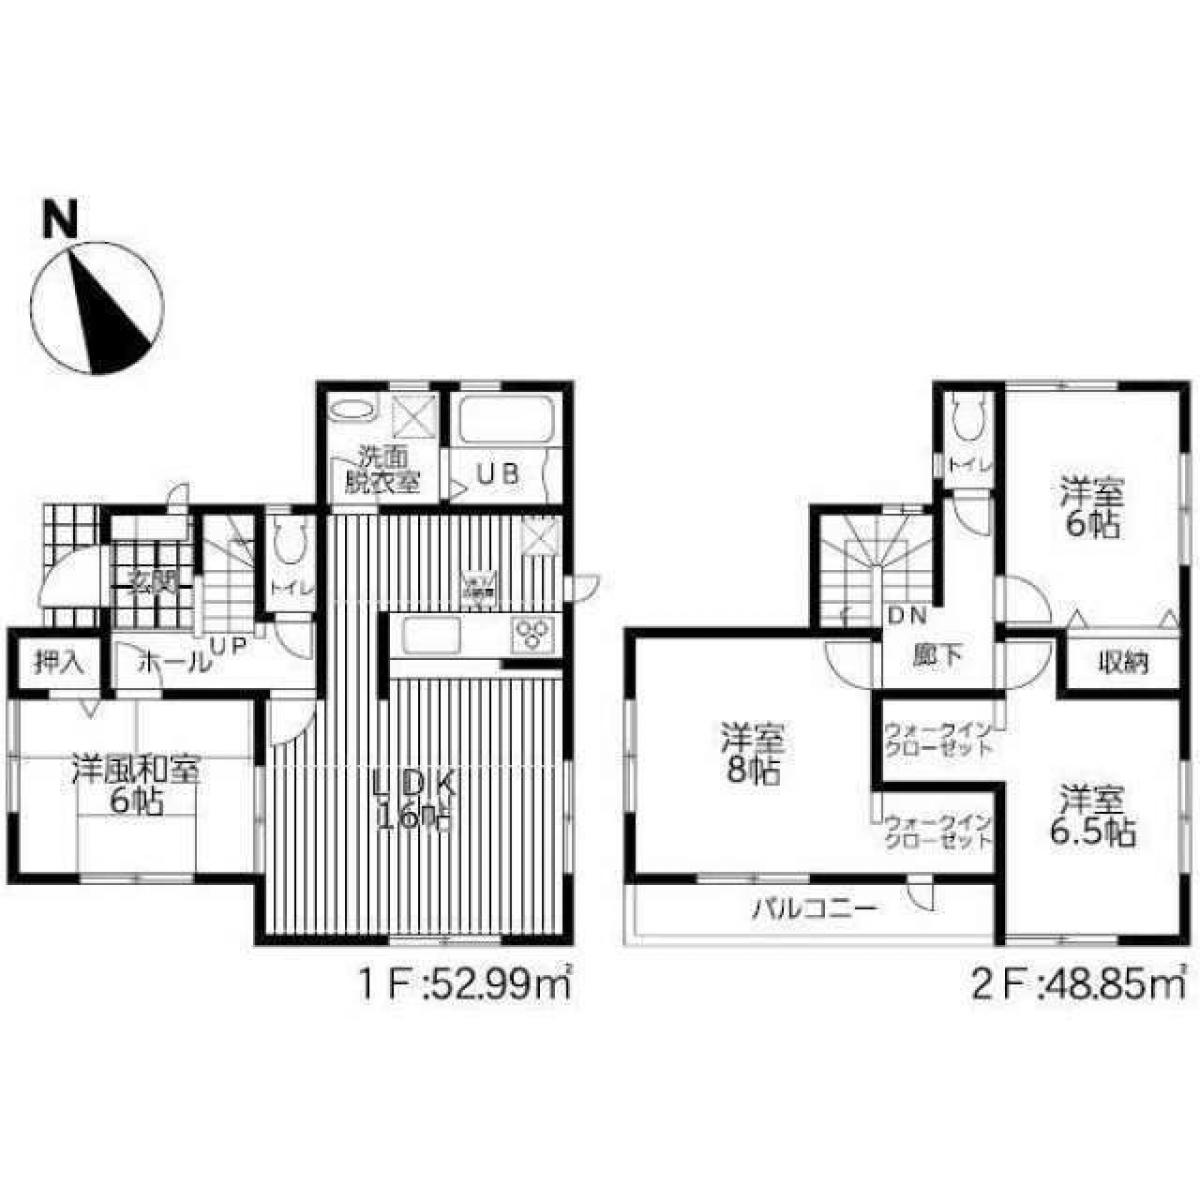 Picture of Home For Sale in Atsugi Shi, Kanagawa, Japan